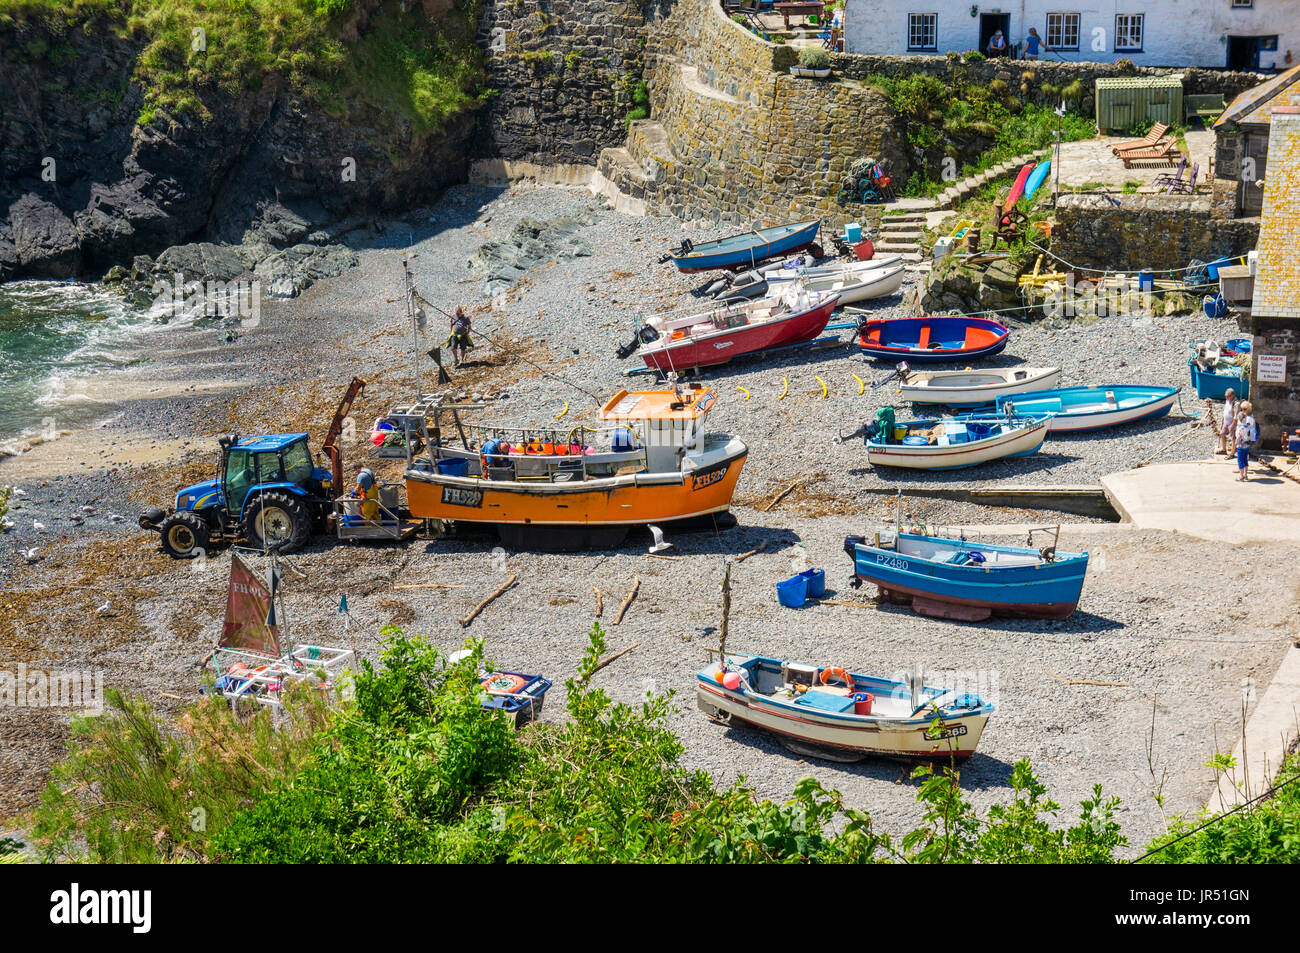 Angelboote/Fischerboote am Cadgwith Cove Dorf, Halbinsel Lizard, Cornwall, UK im Sommer Stockfoto